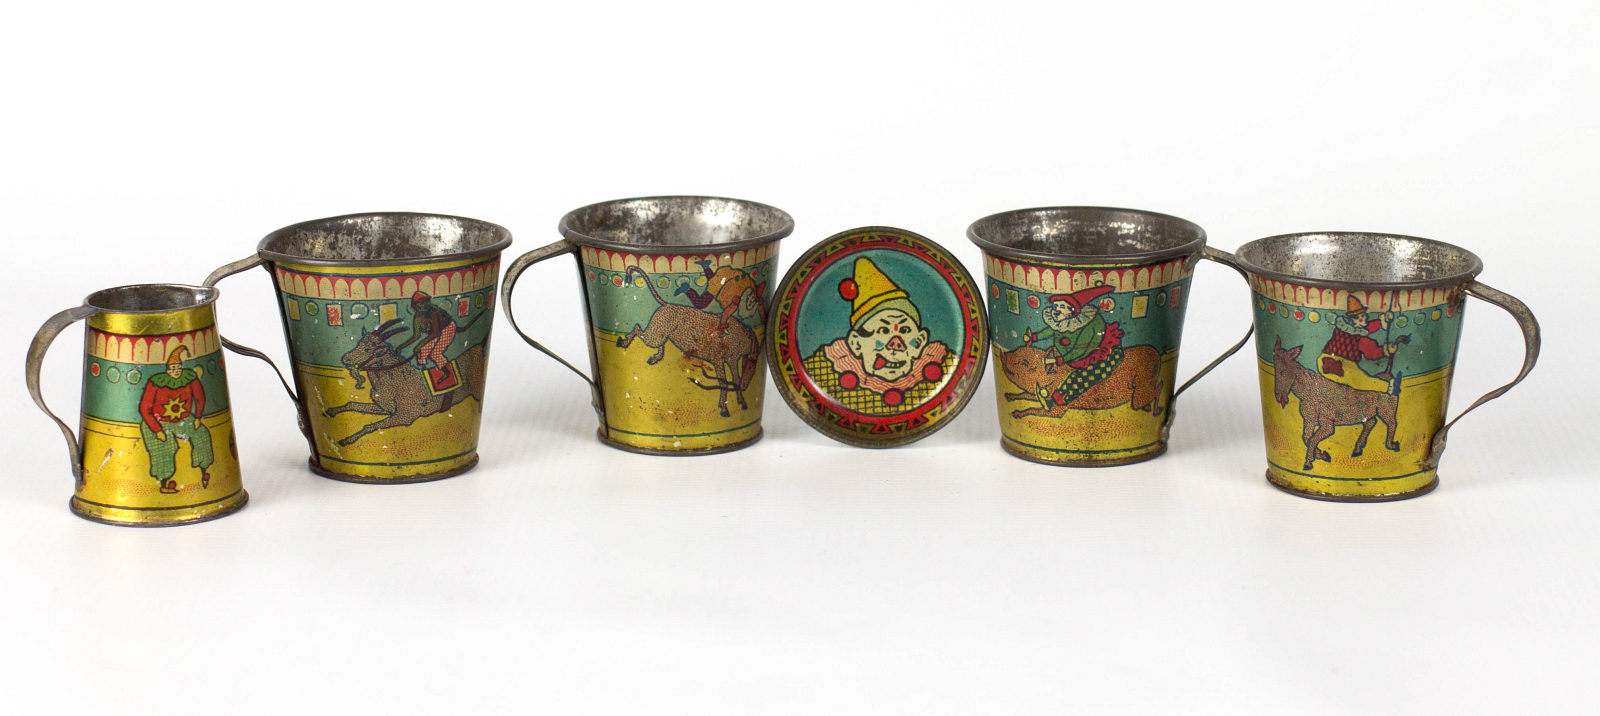 A SET OF CHILD'S TEA CUPS WITH CIRCUS CLOWNS